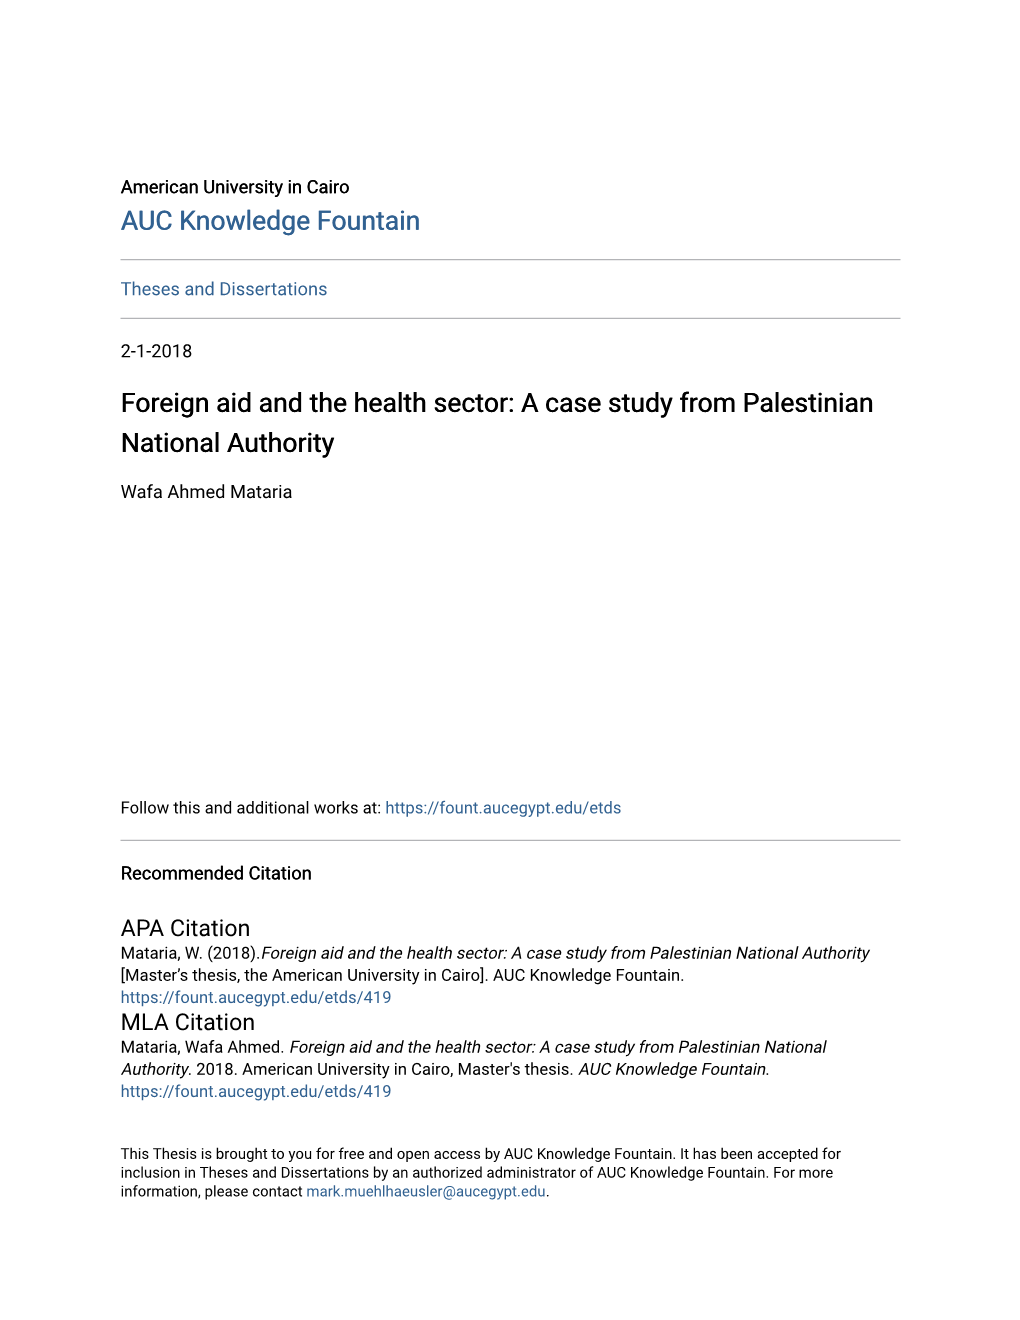 Foreign Aid and the Health Sector: a Case Study from Palestinian National Authority